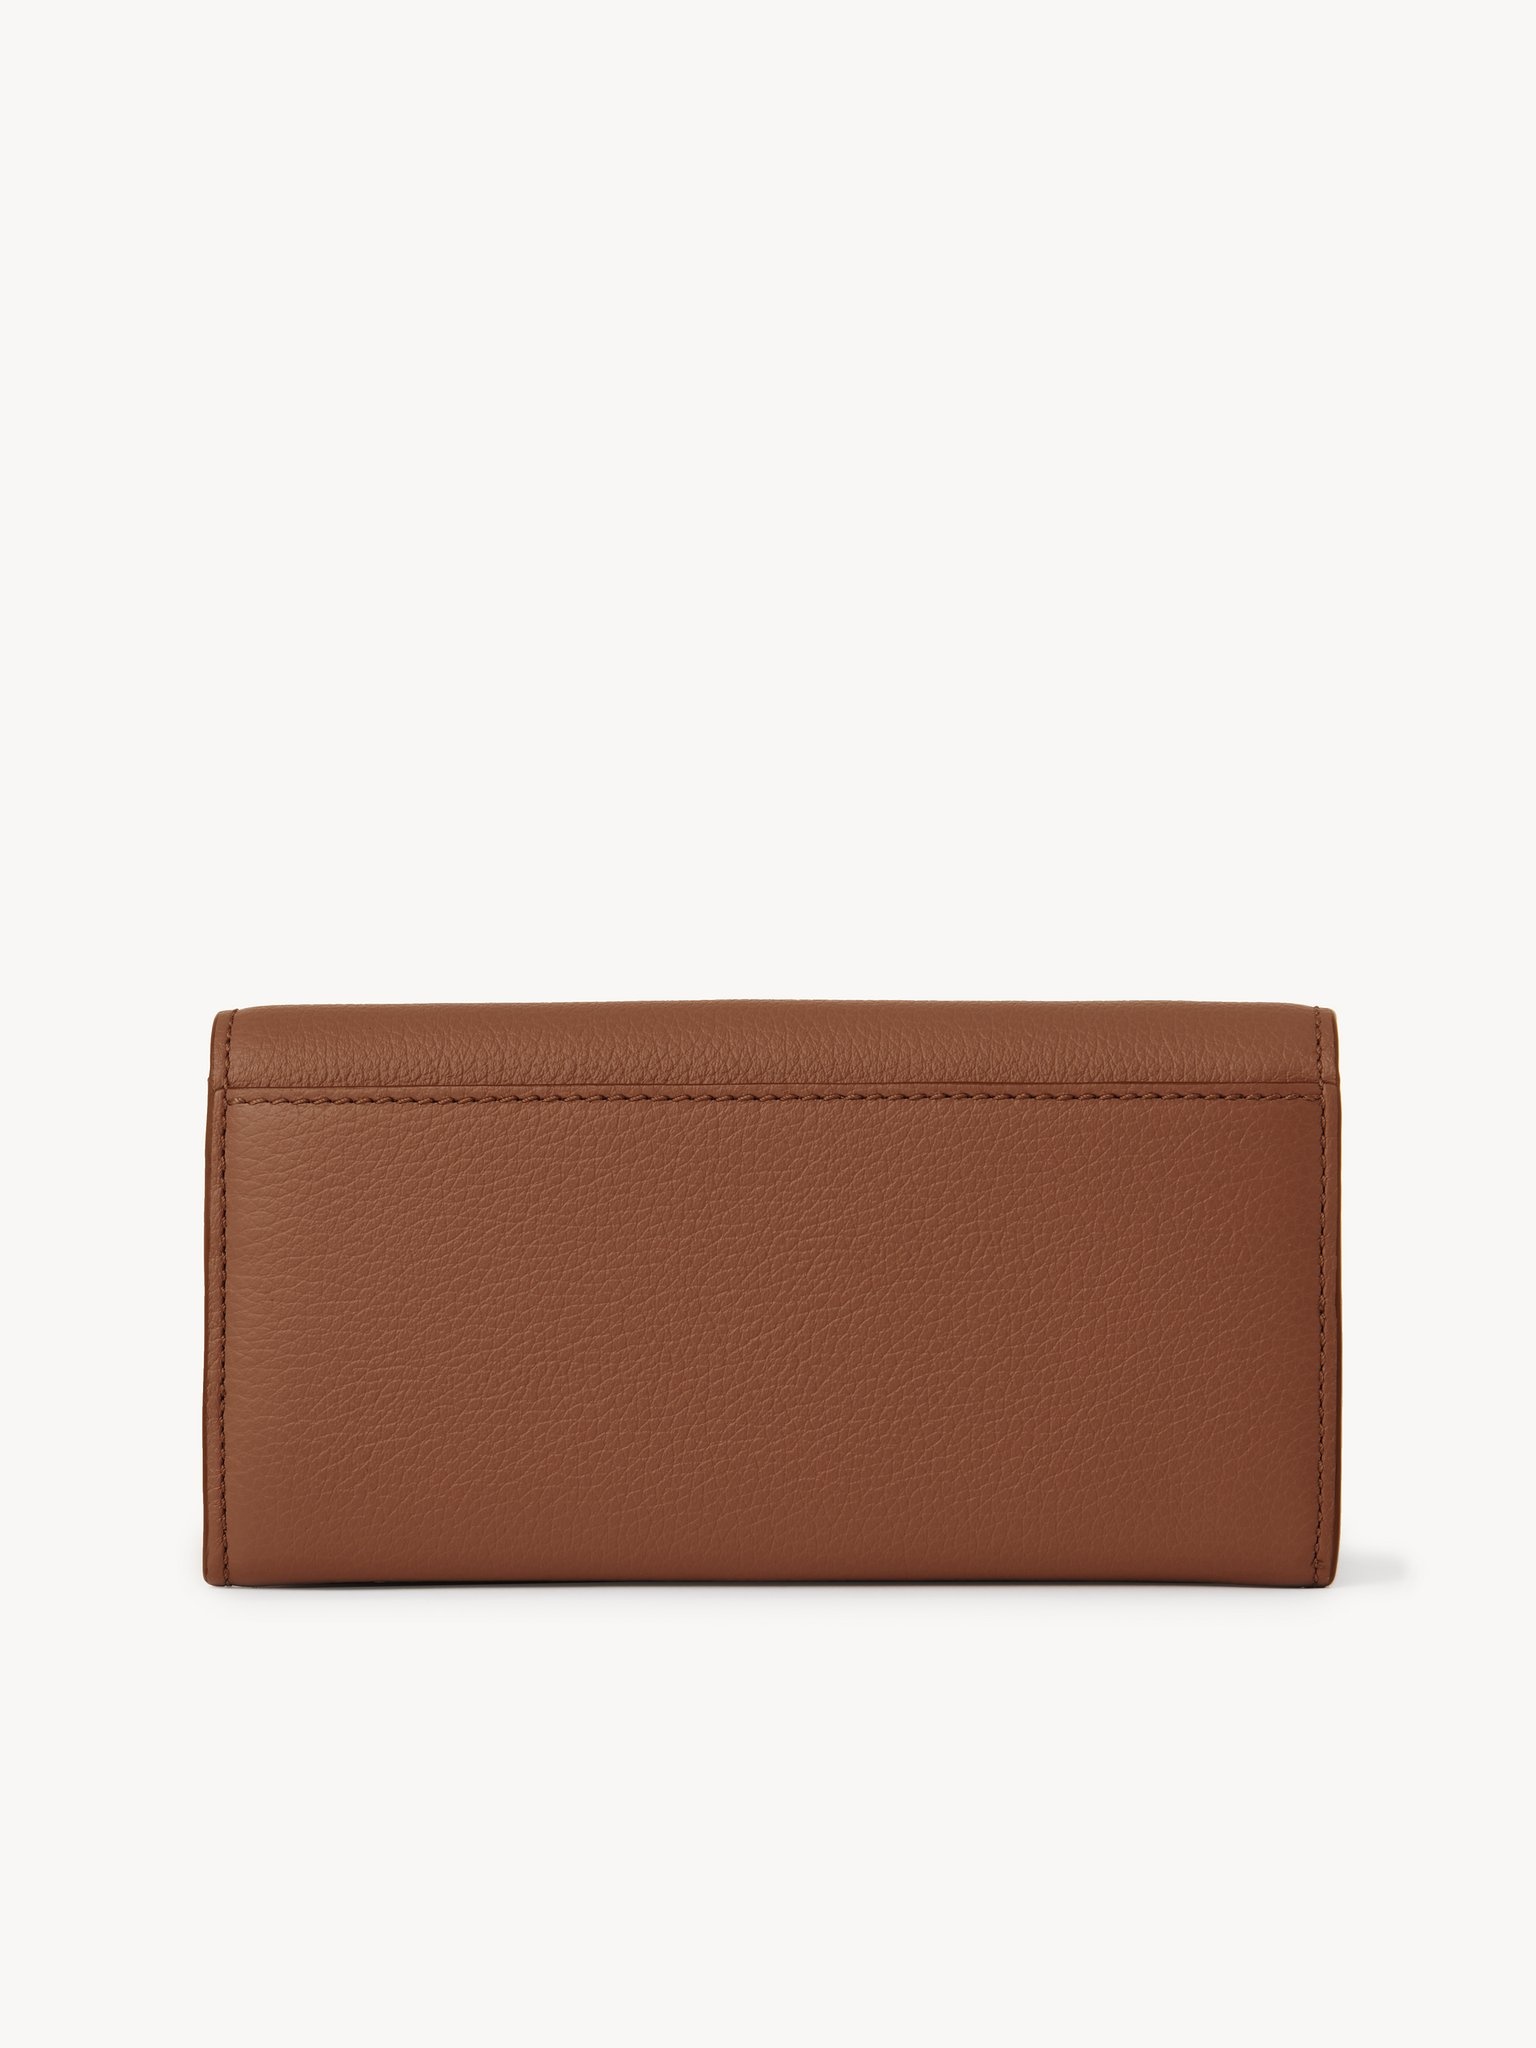 MARCIE LONG WALLET WITH FLAP - 2